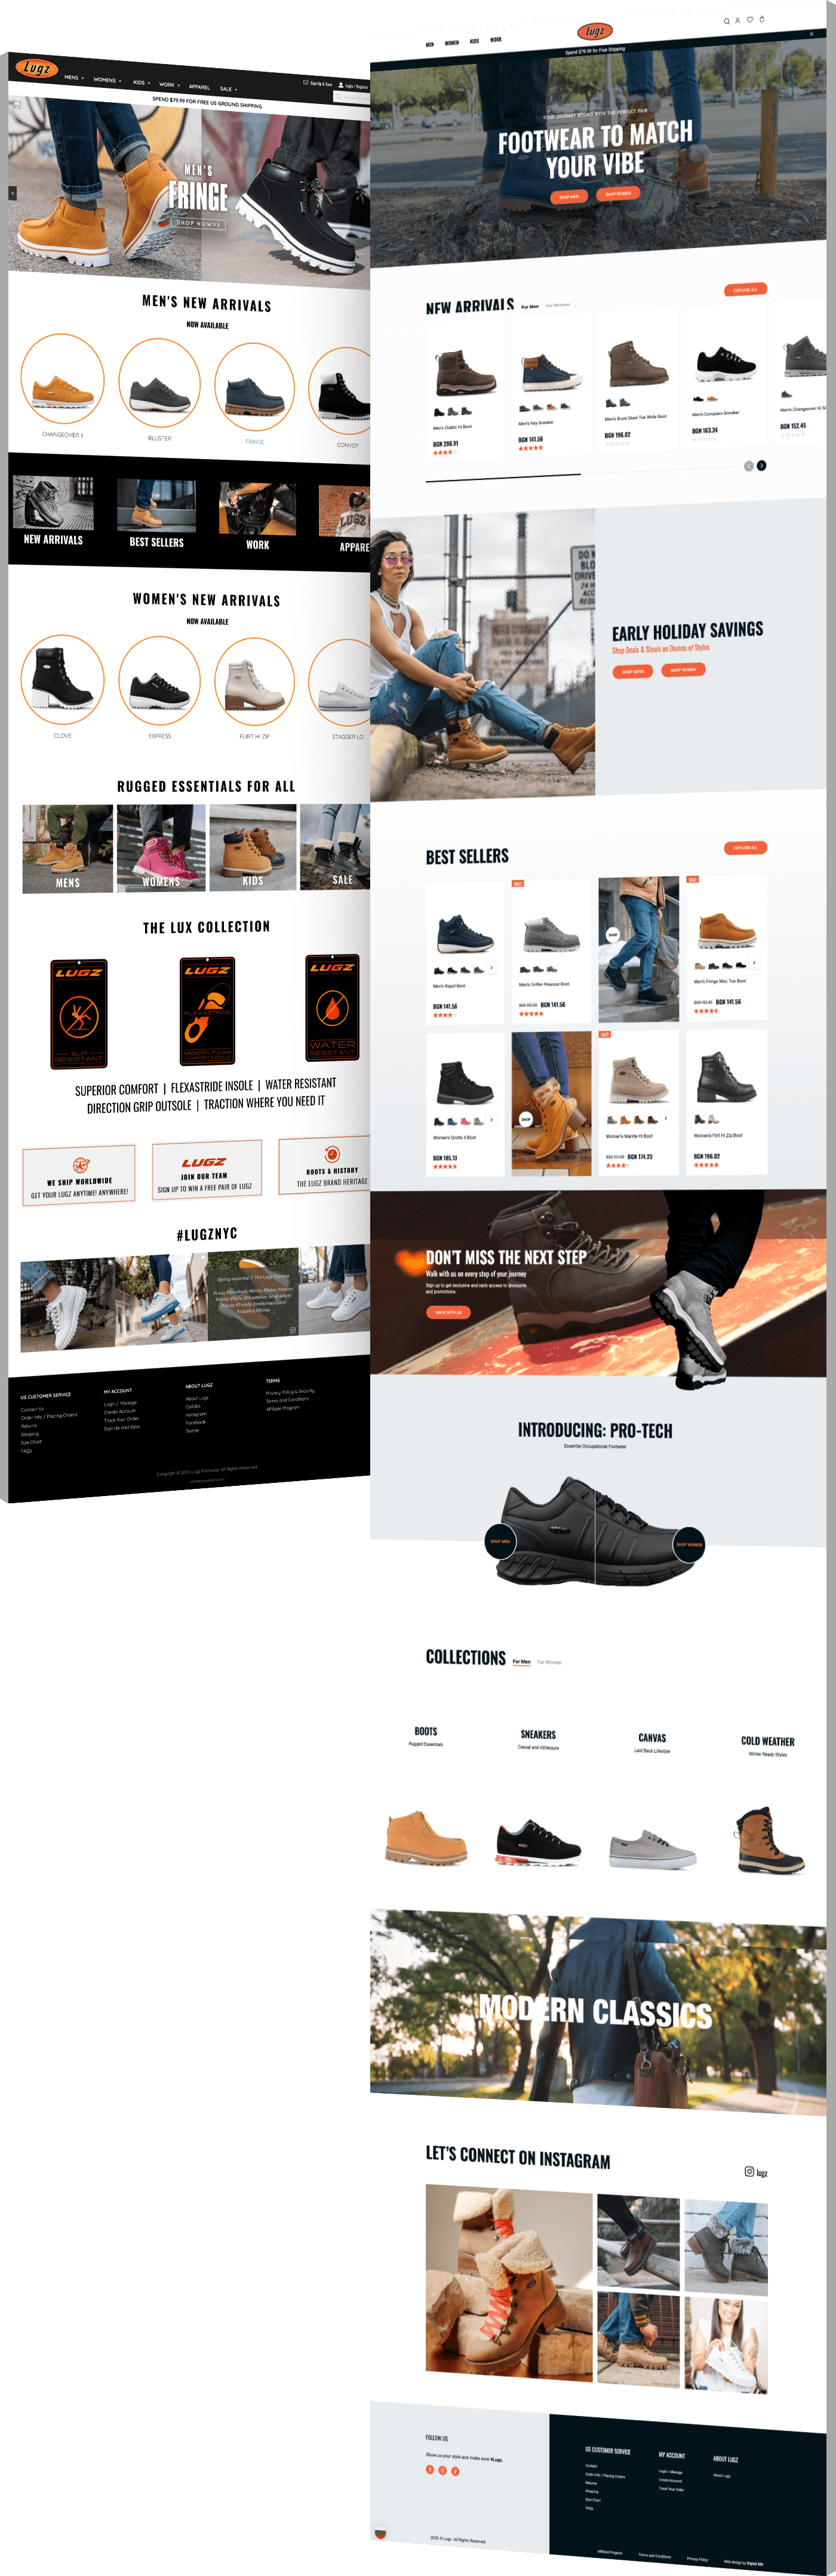 Web design before and after photos of Lugz website